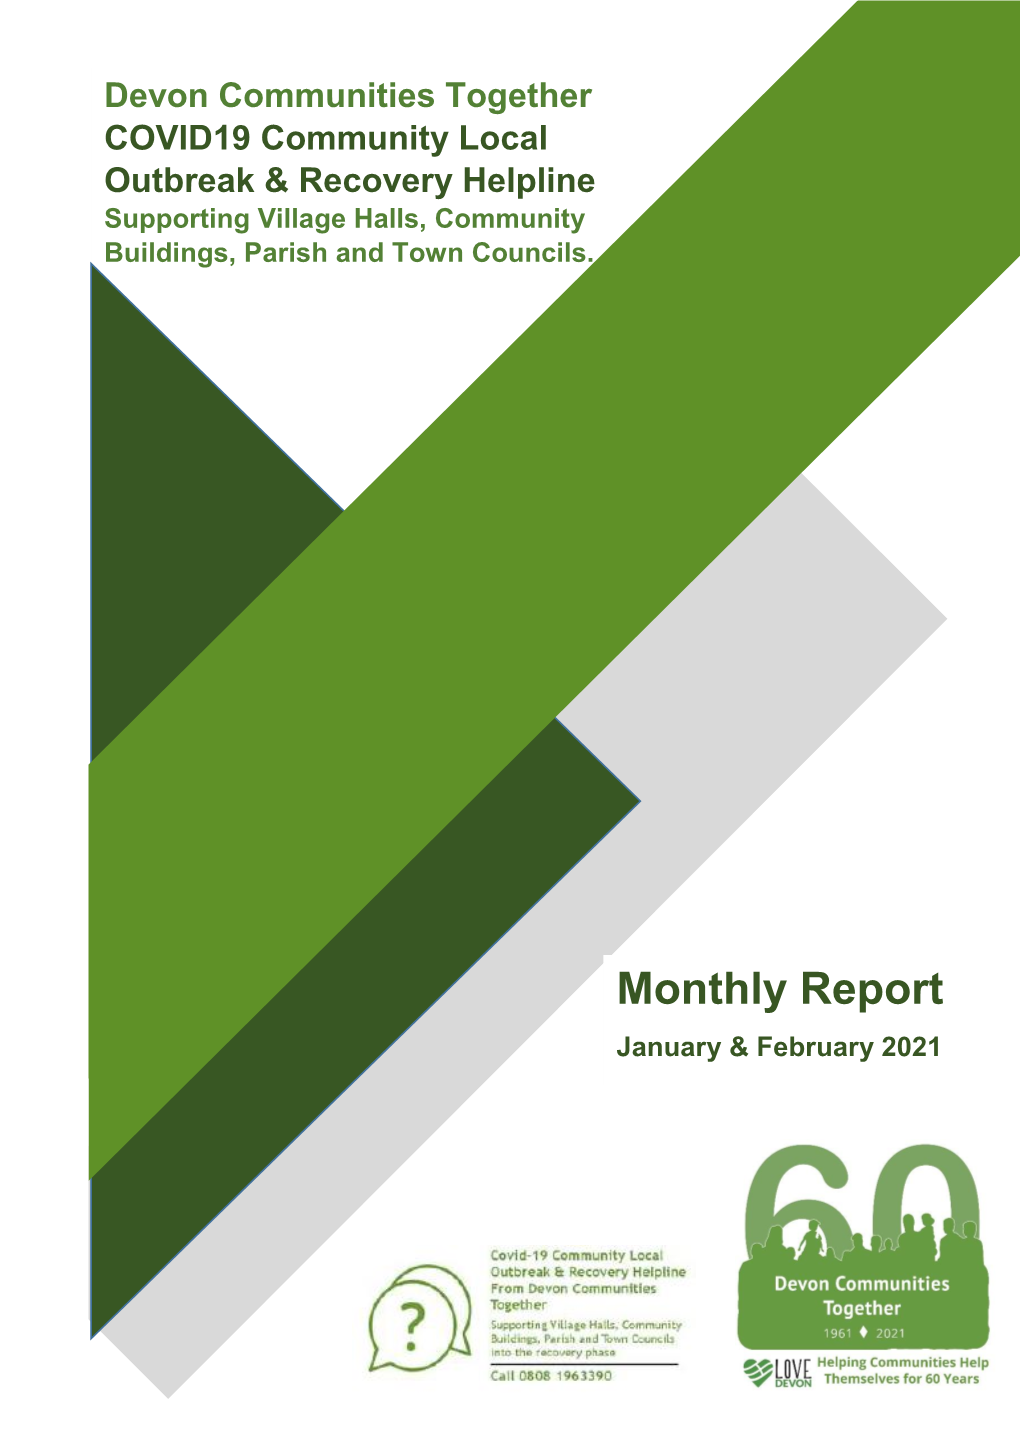 Download the January-February 2021 Report Here